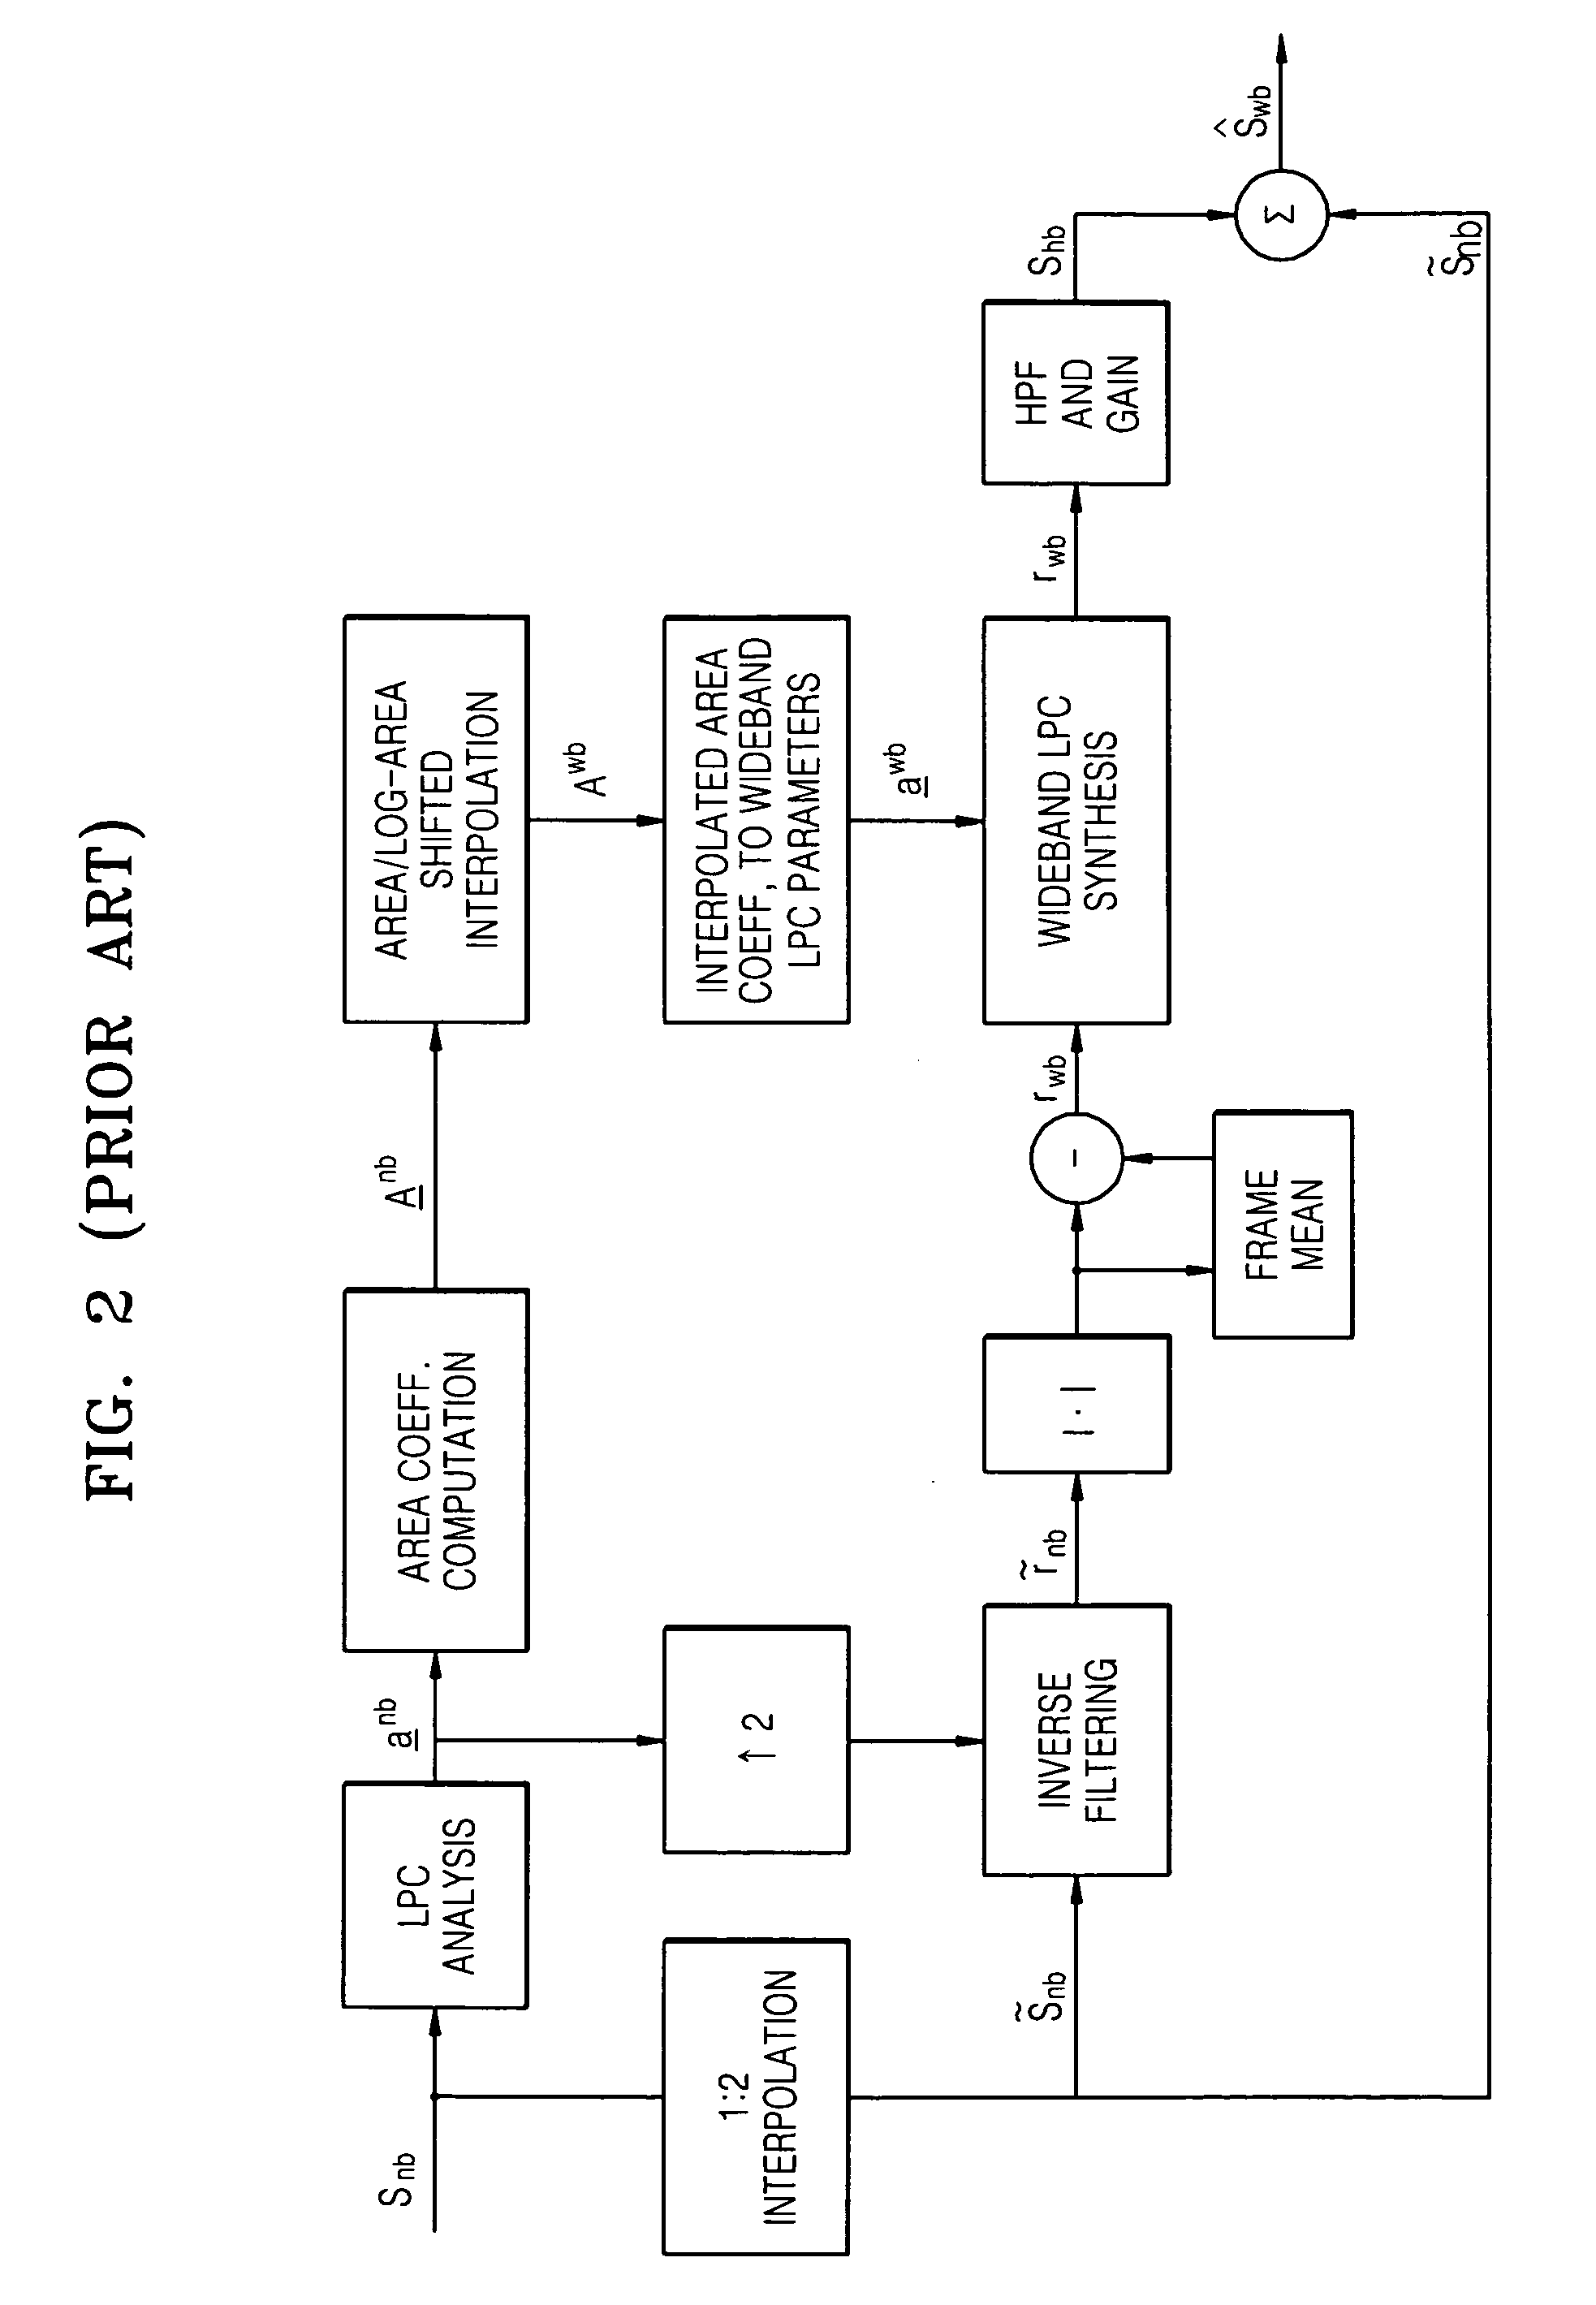 Scalable speech coding/decoding apparatus, method, and medium having mixed structure